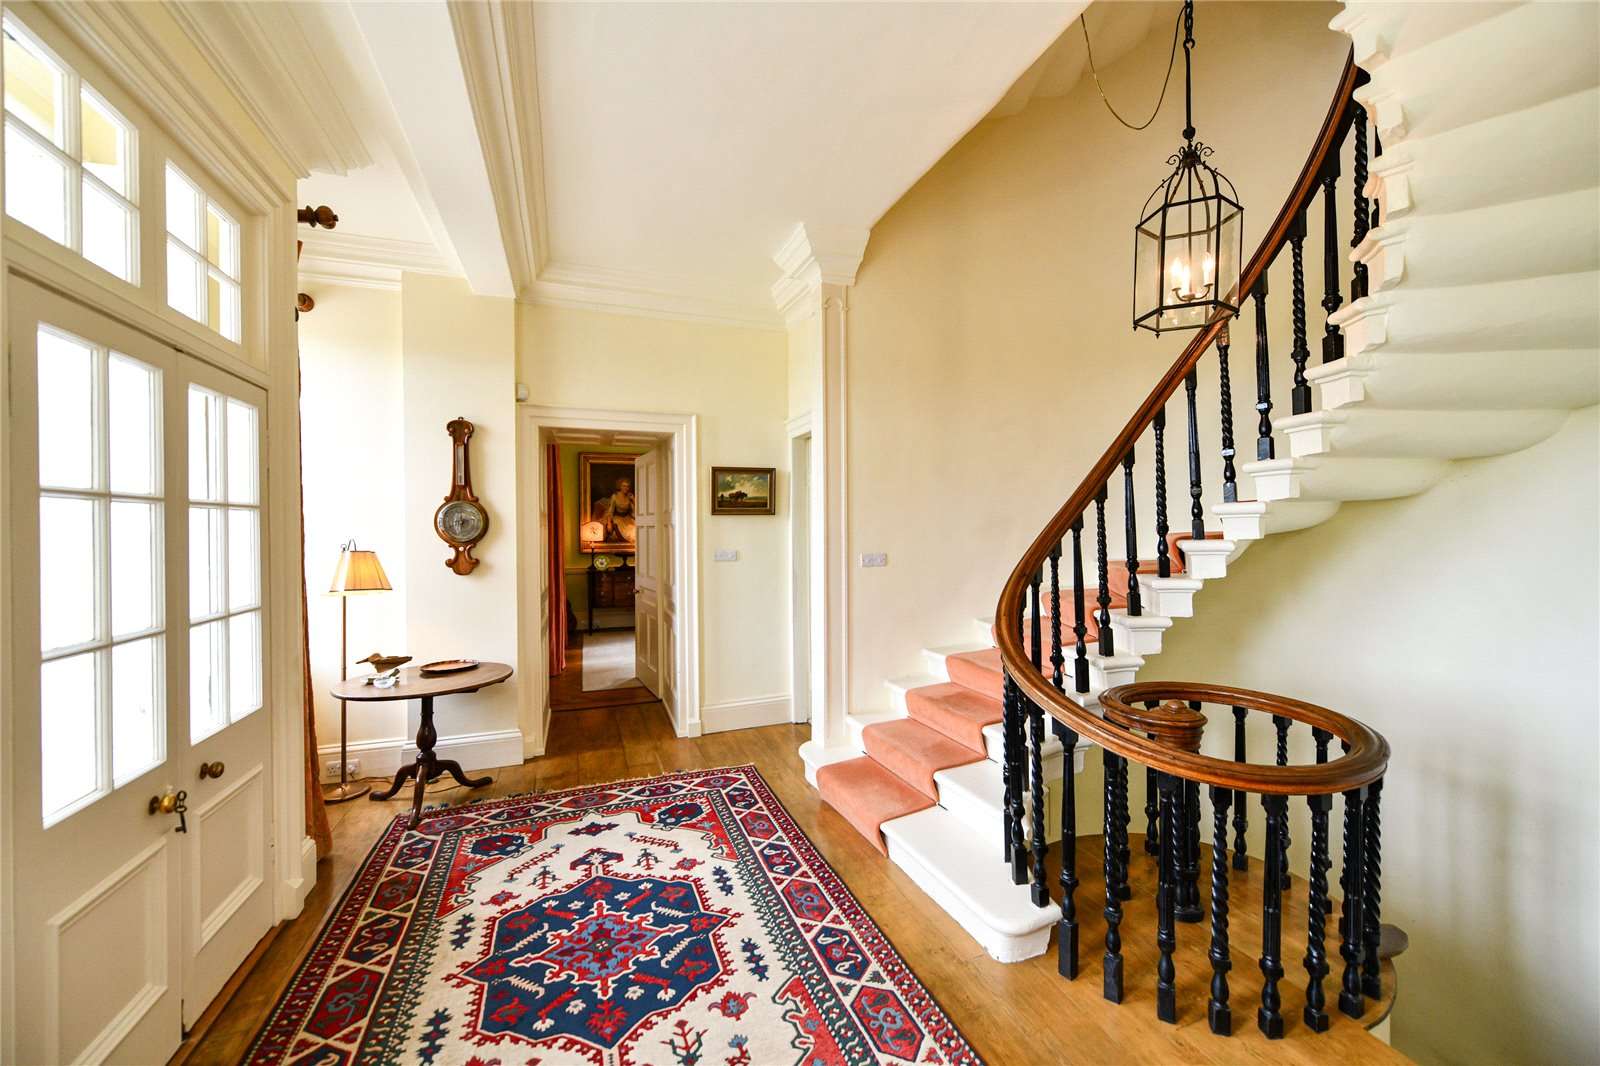 Logan House hosts nine bedrooms, three receptions as well as many other attractive amenities such as grand fireplaces and a curved staircase leading guests to the second floor of the house.